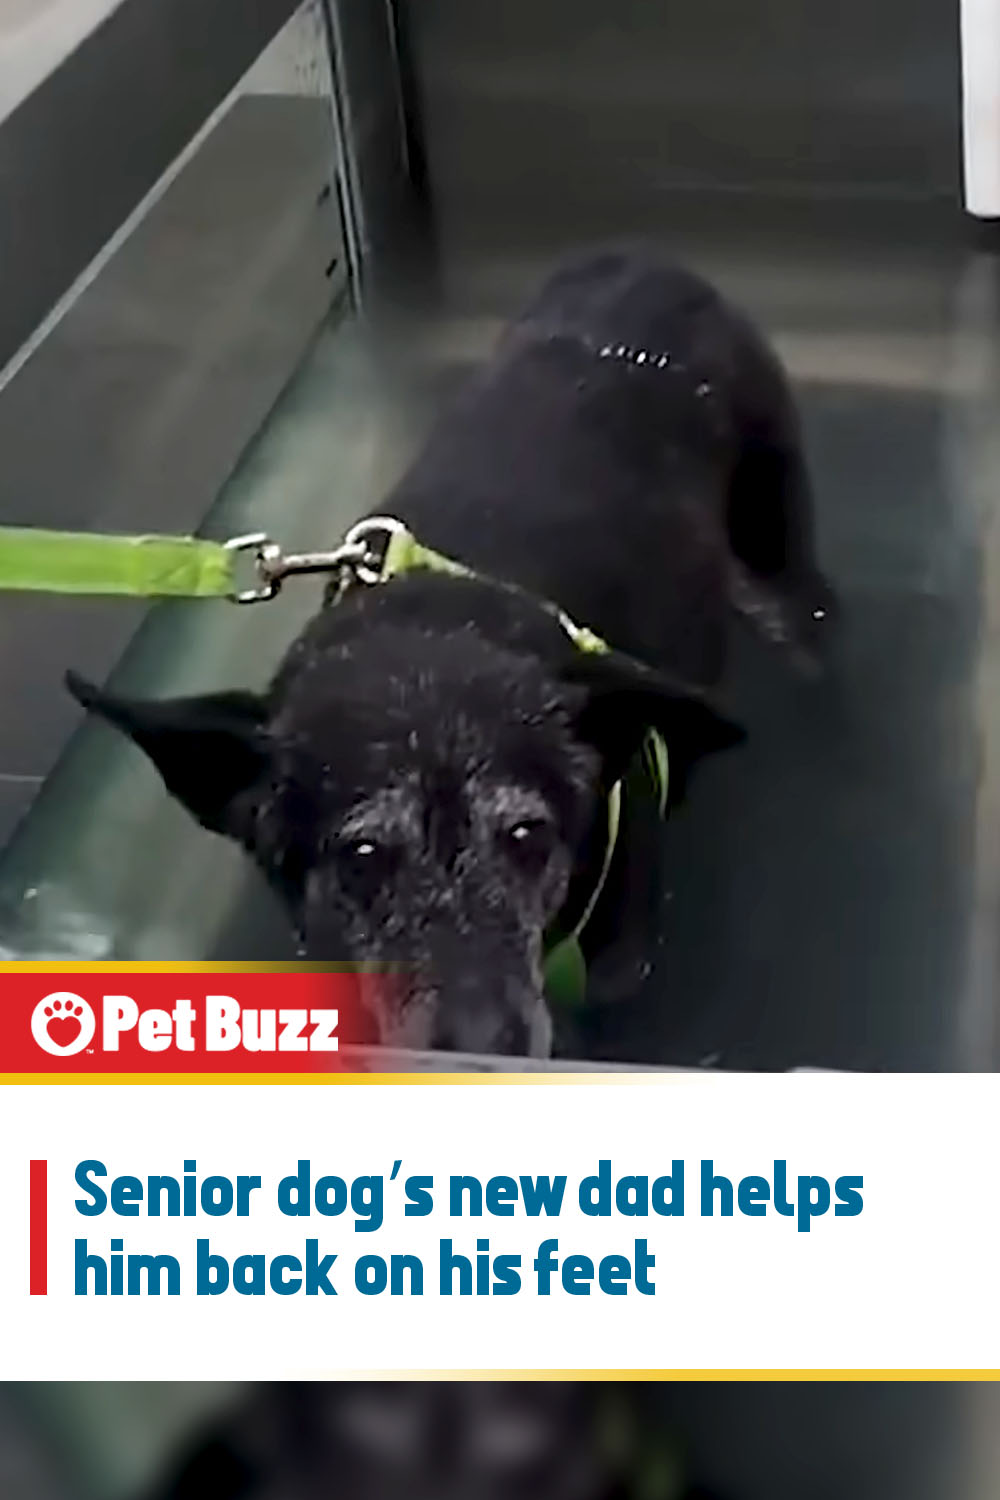 Senior dog’s new dad helps him back on his feet